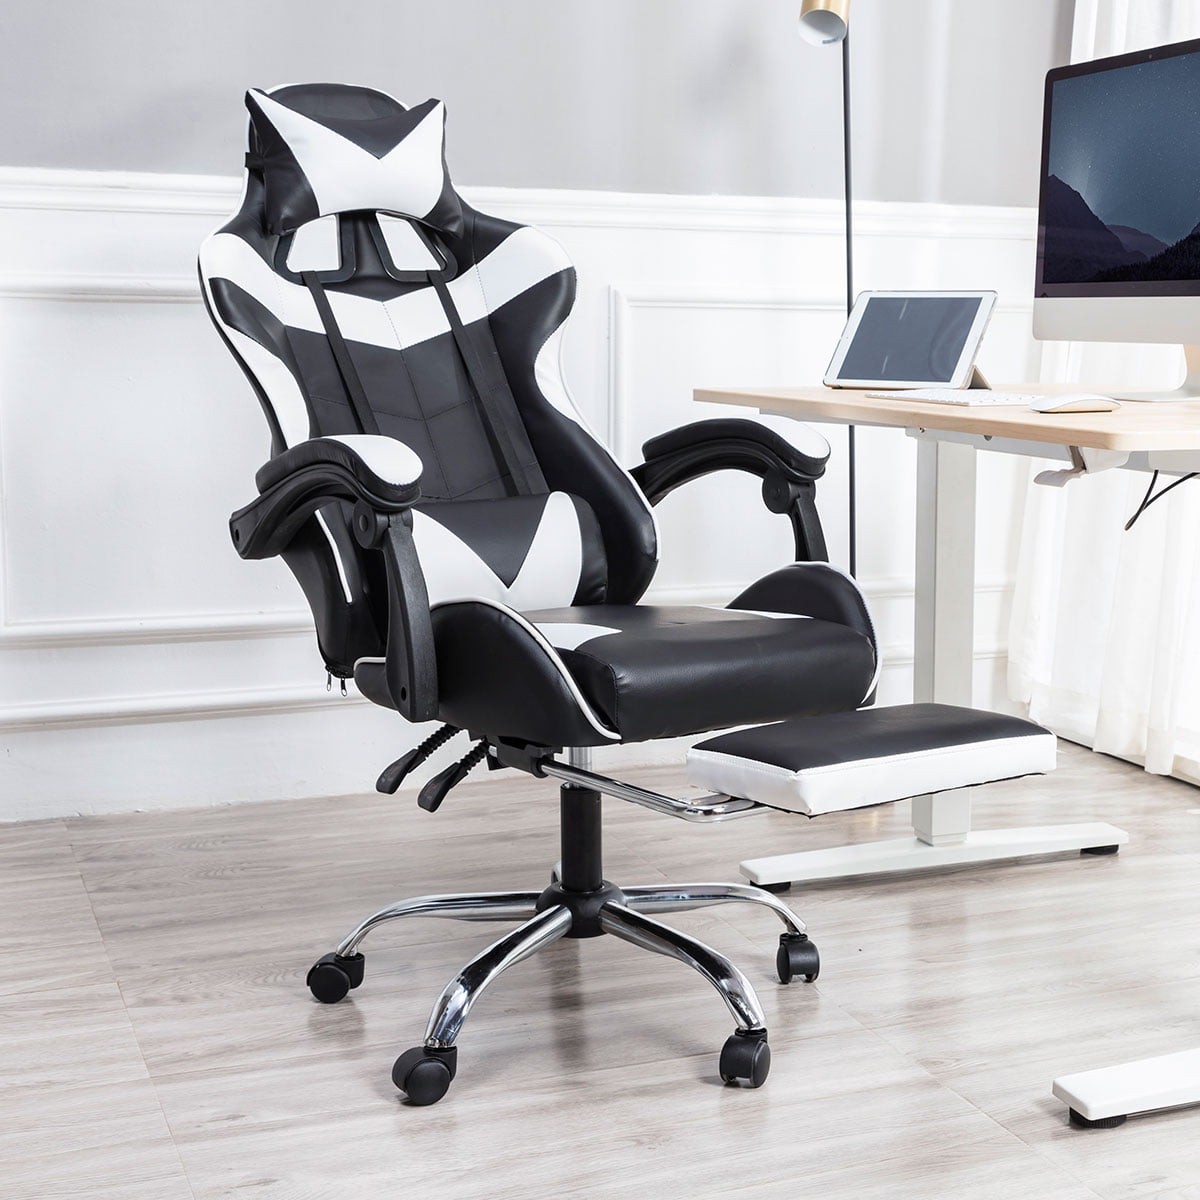 Details about   Heavy Duty Ergonomic Gaming Chair Office Desk Computer High Back Cushion Swivel 